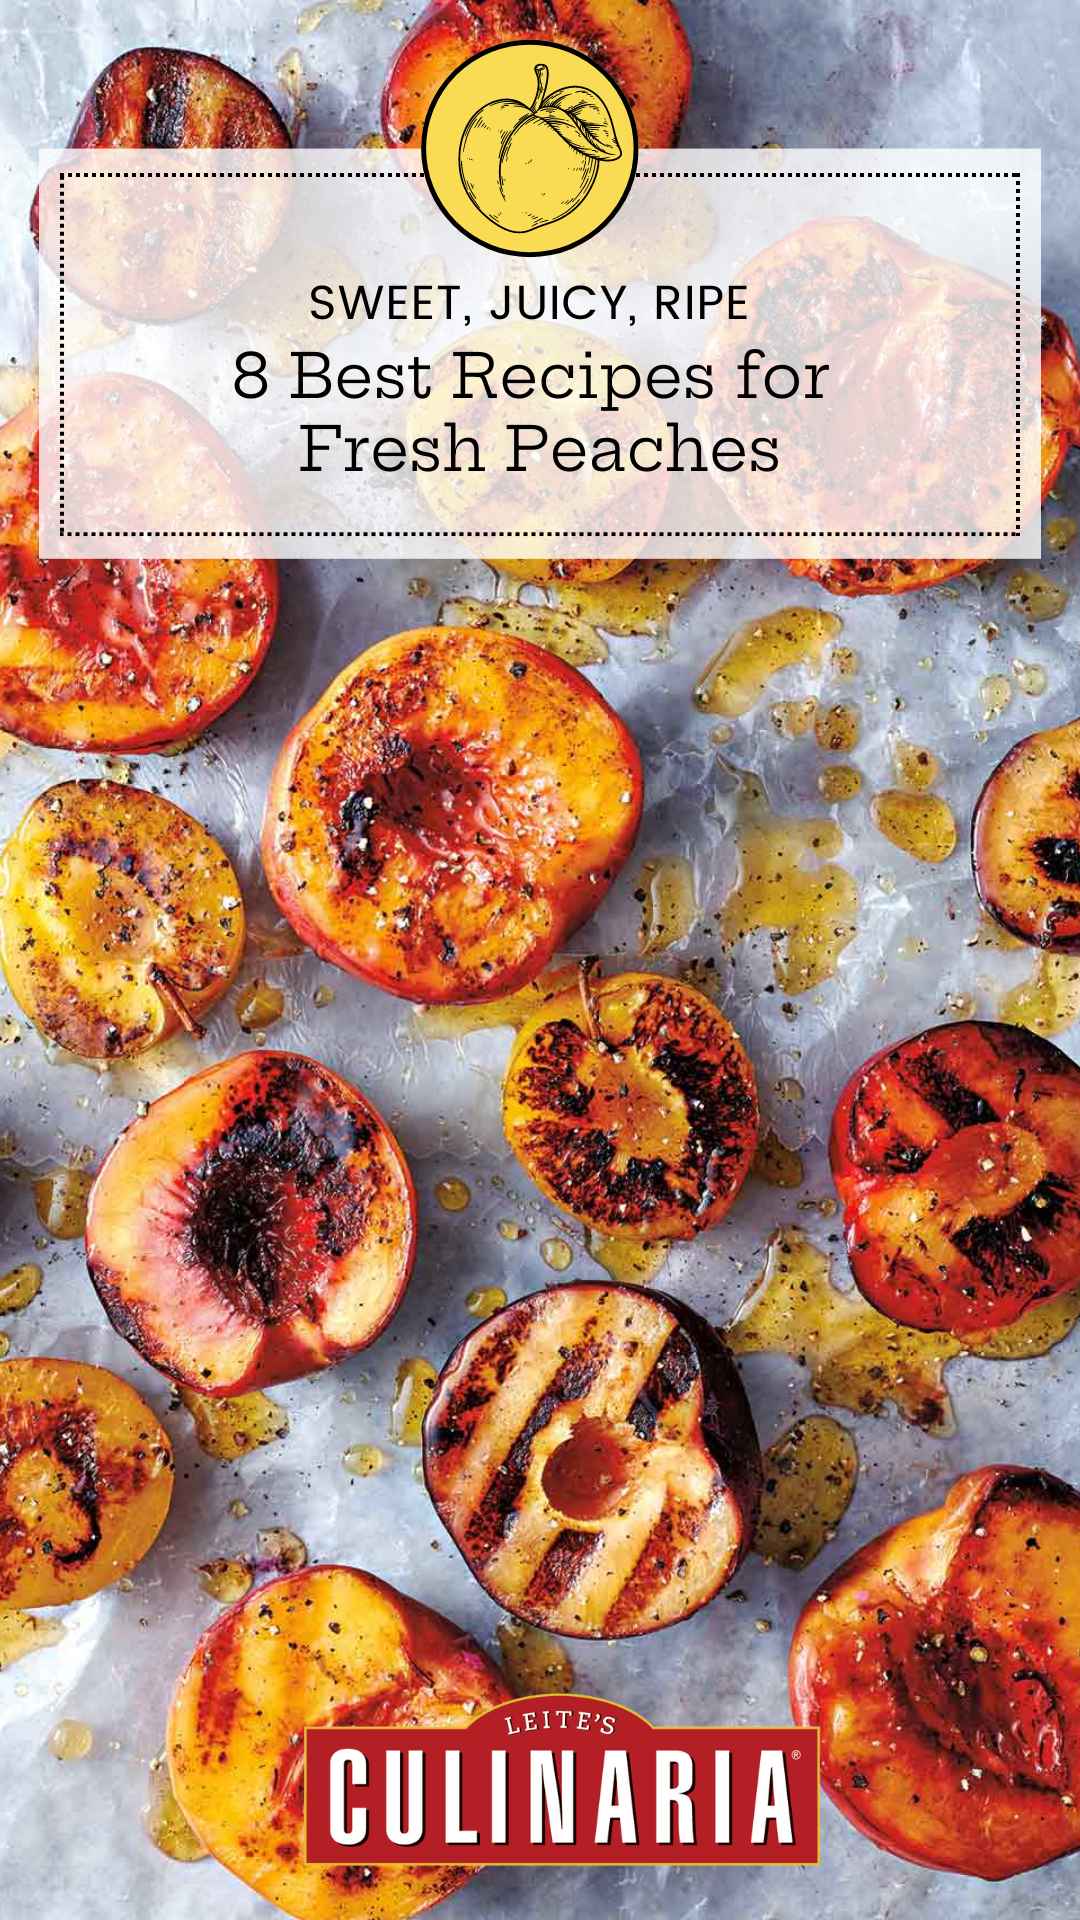 Grilled peach halves on a sheet of wax paper.